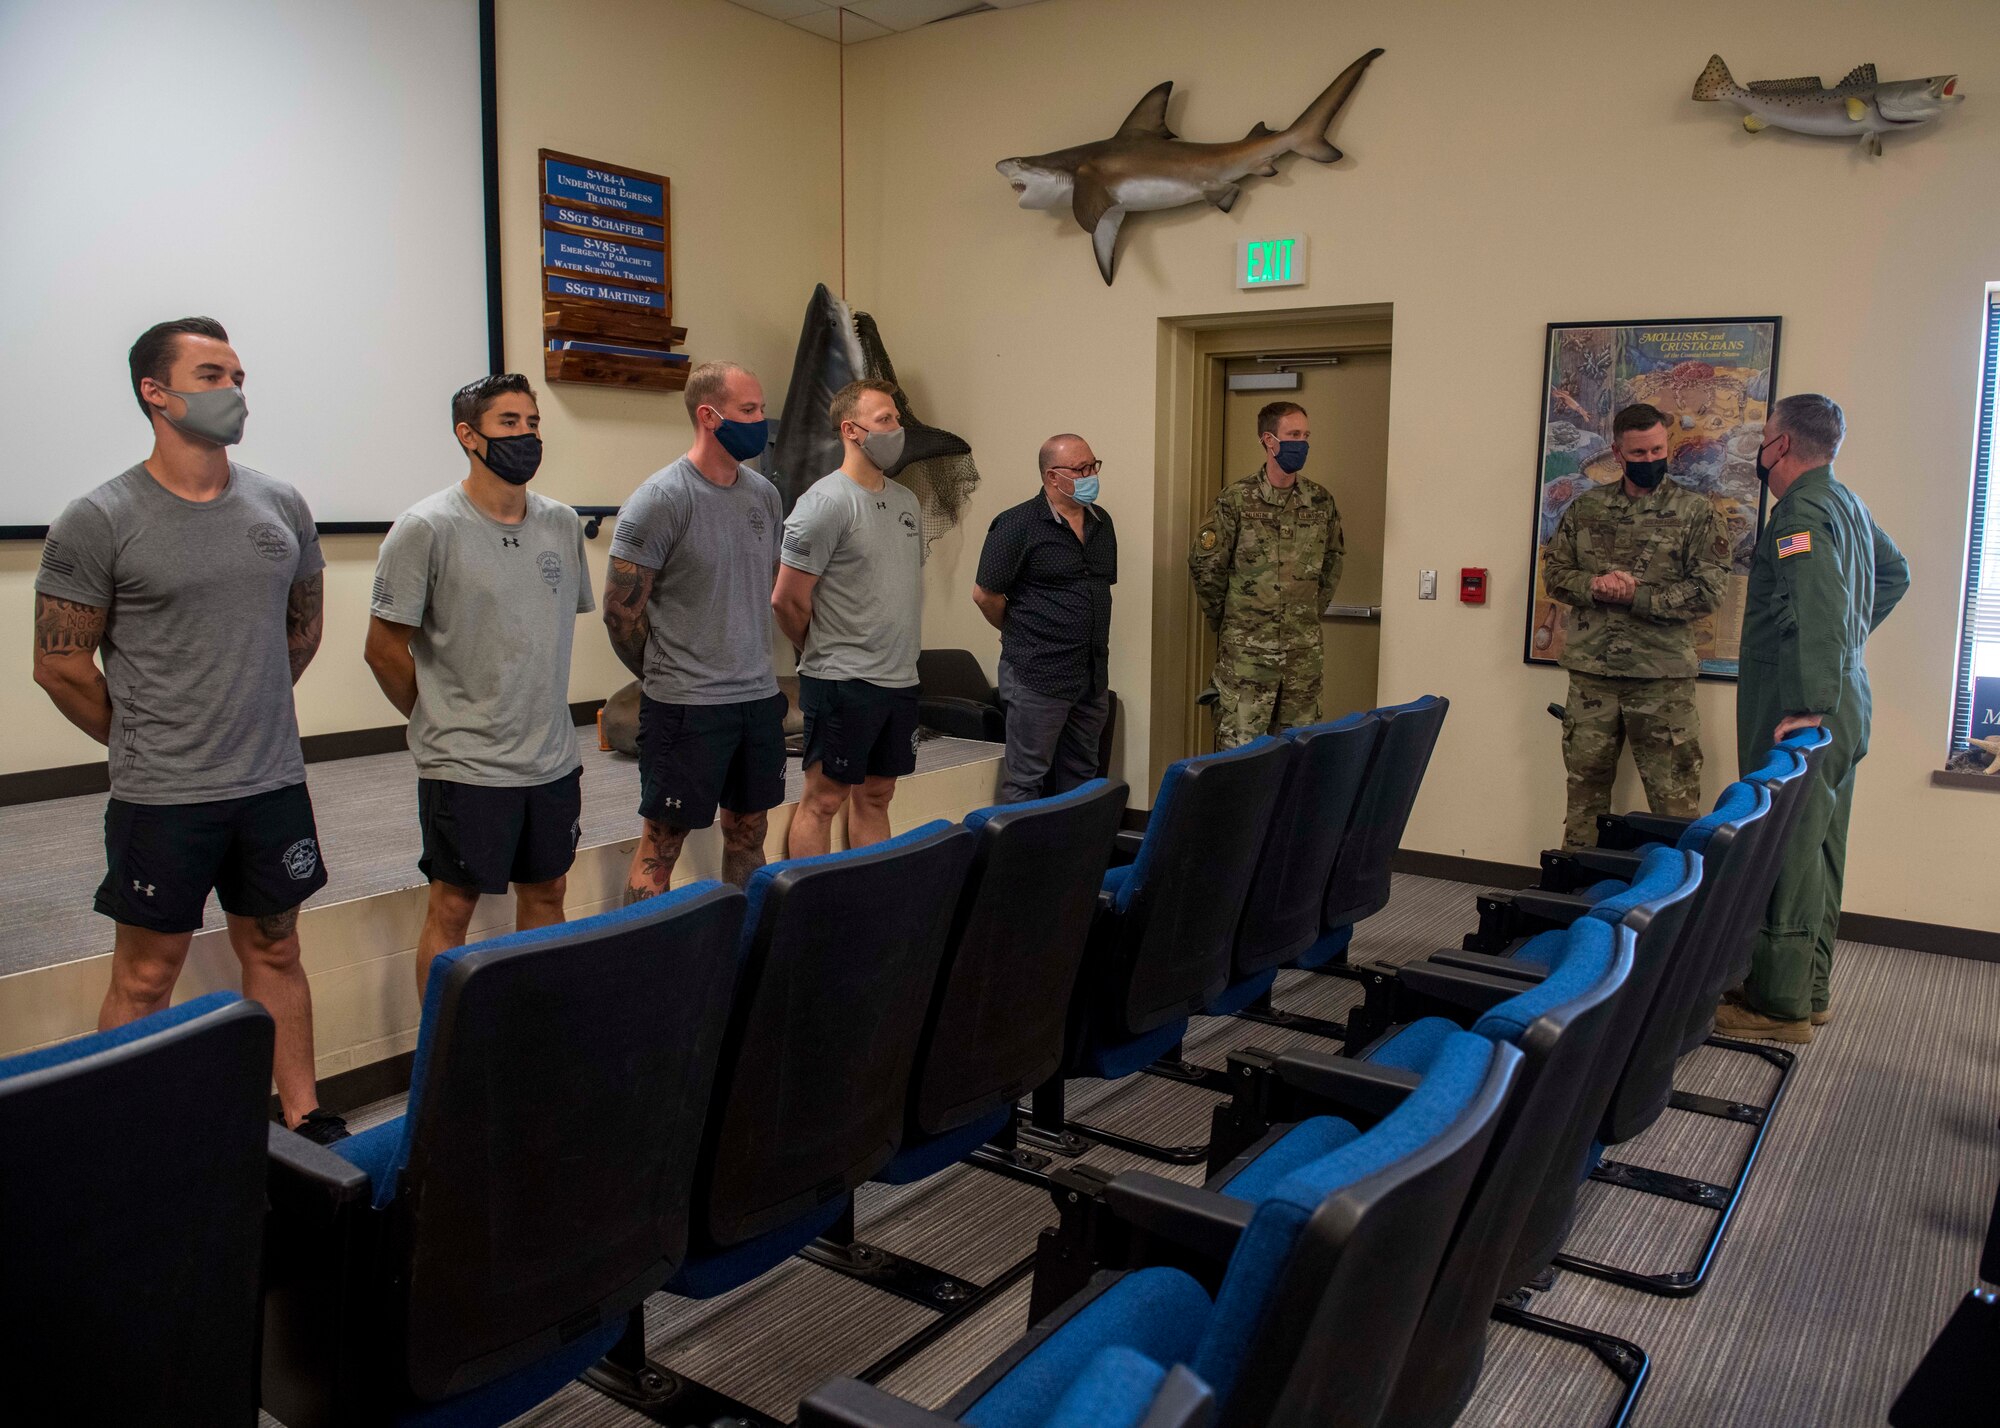 U.S. Air Force Lt. Gen. Brad Webb, commander of Air Education and Training Command, greets Airmen from the Survival, Evasion, Resistance and Escape water survival flight at Fairchild Air Force Base, Washington, Aug. 11, 2021. The 336th TRG consists of three squadrons with geographically separated detachments in Texas, Alaska and Washington. (U.S. Air Force photo by Staff Sgt. Lawrence Sena)